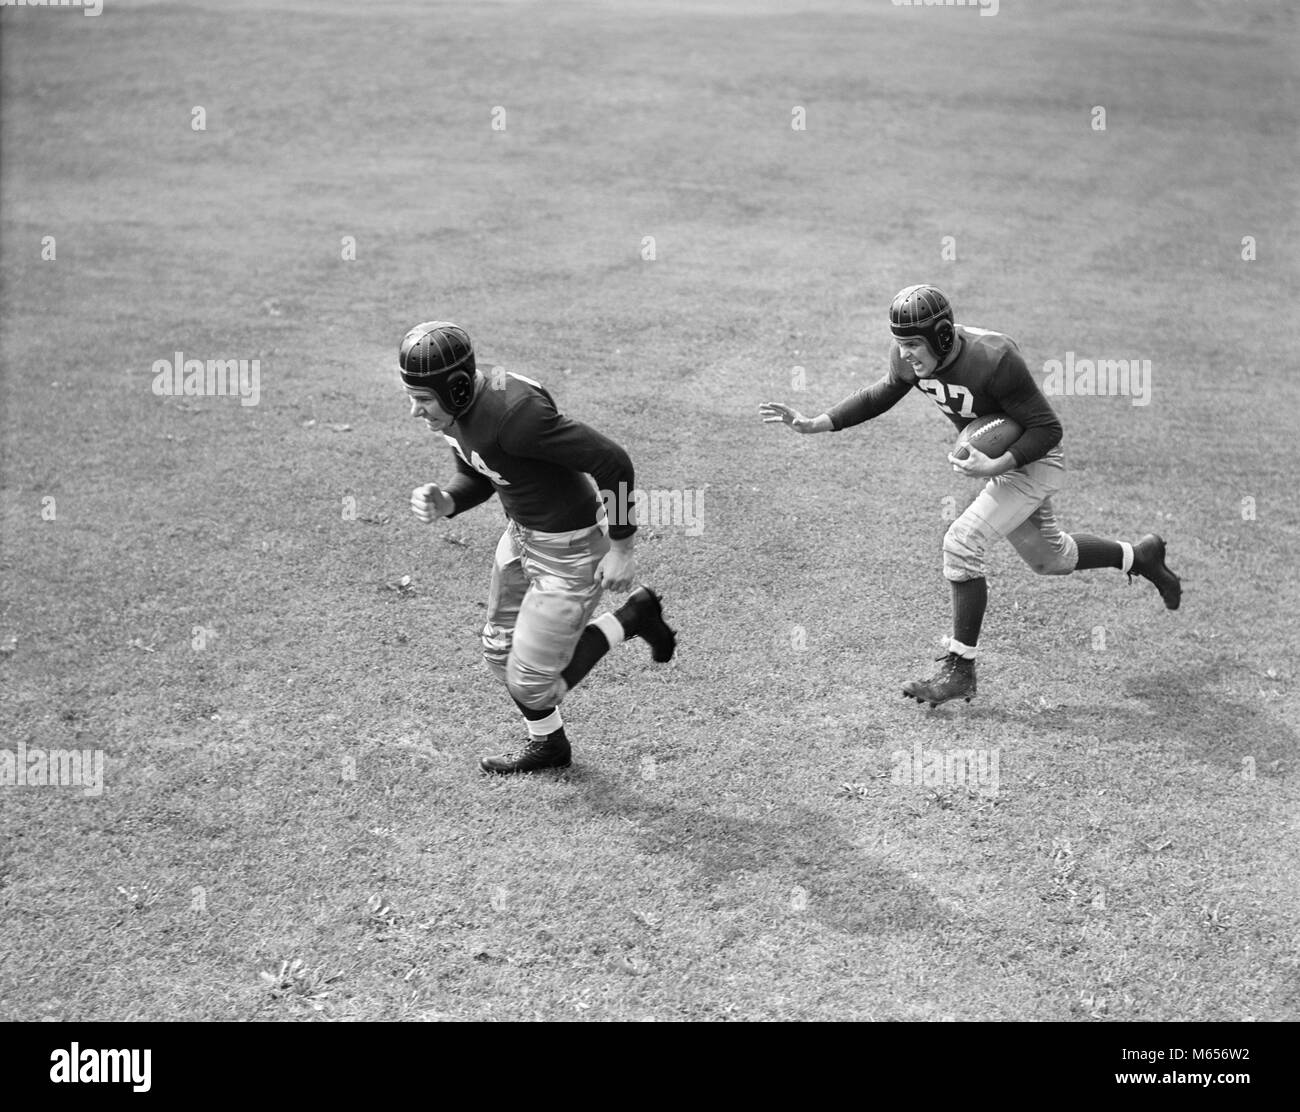 1940s TWO MEN PLAYING FOOTBALL WEARING LEATHER HELMETS ONE RUNNING WITH FOOTBALL OTHER BLOCKING FOR HIM - f9632 HAR001 HARS HEALTHINESS COPY SPACE FULL-LENGTH PHYSICAL FITNESS RISK ATHLETIC PROFESSION TOWARDS CONFIDENCE NOSTALGIA TOGETHERNESS 20-25 YEARS GOALS OCCUPATION PROTECTING HIGH ANGLE PROTECTION STRENGTH STRATEGY UNIVERSITIES CAREERS EXCITEMENT RECREATION 18-19 YEARS DIRECTION SUPPORT CONNECTION HIGHER EDUCATION SPORTS FOOTBALL GOOD HEALTH ATHLETES BLOCKING COLLEGES HELMETS BALL SPORT DEFENSE MALES YOUNG ADULT MAN AMERICAN FOOTBALL B&W BLACK AND WHITE CAUCASIAN ETHNICITY INTERFERENCE Stock Photo